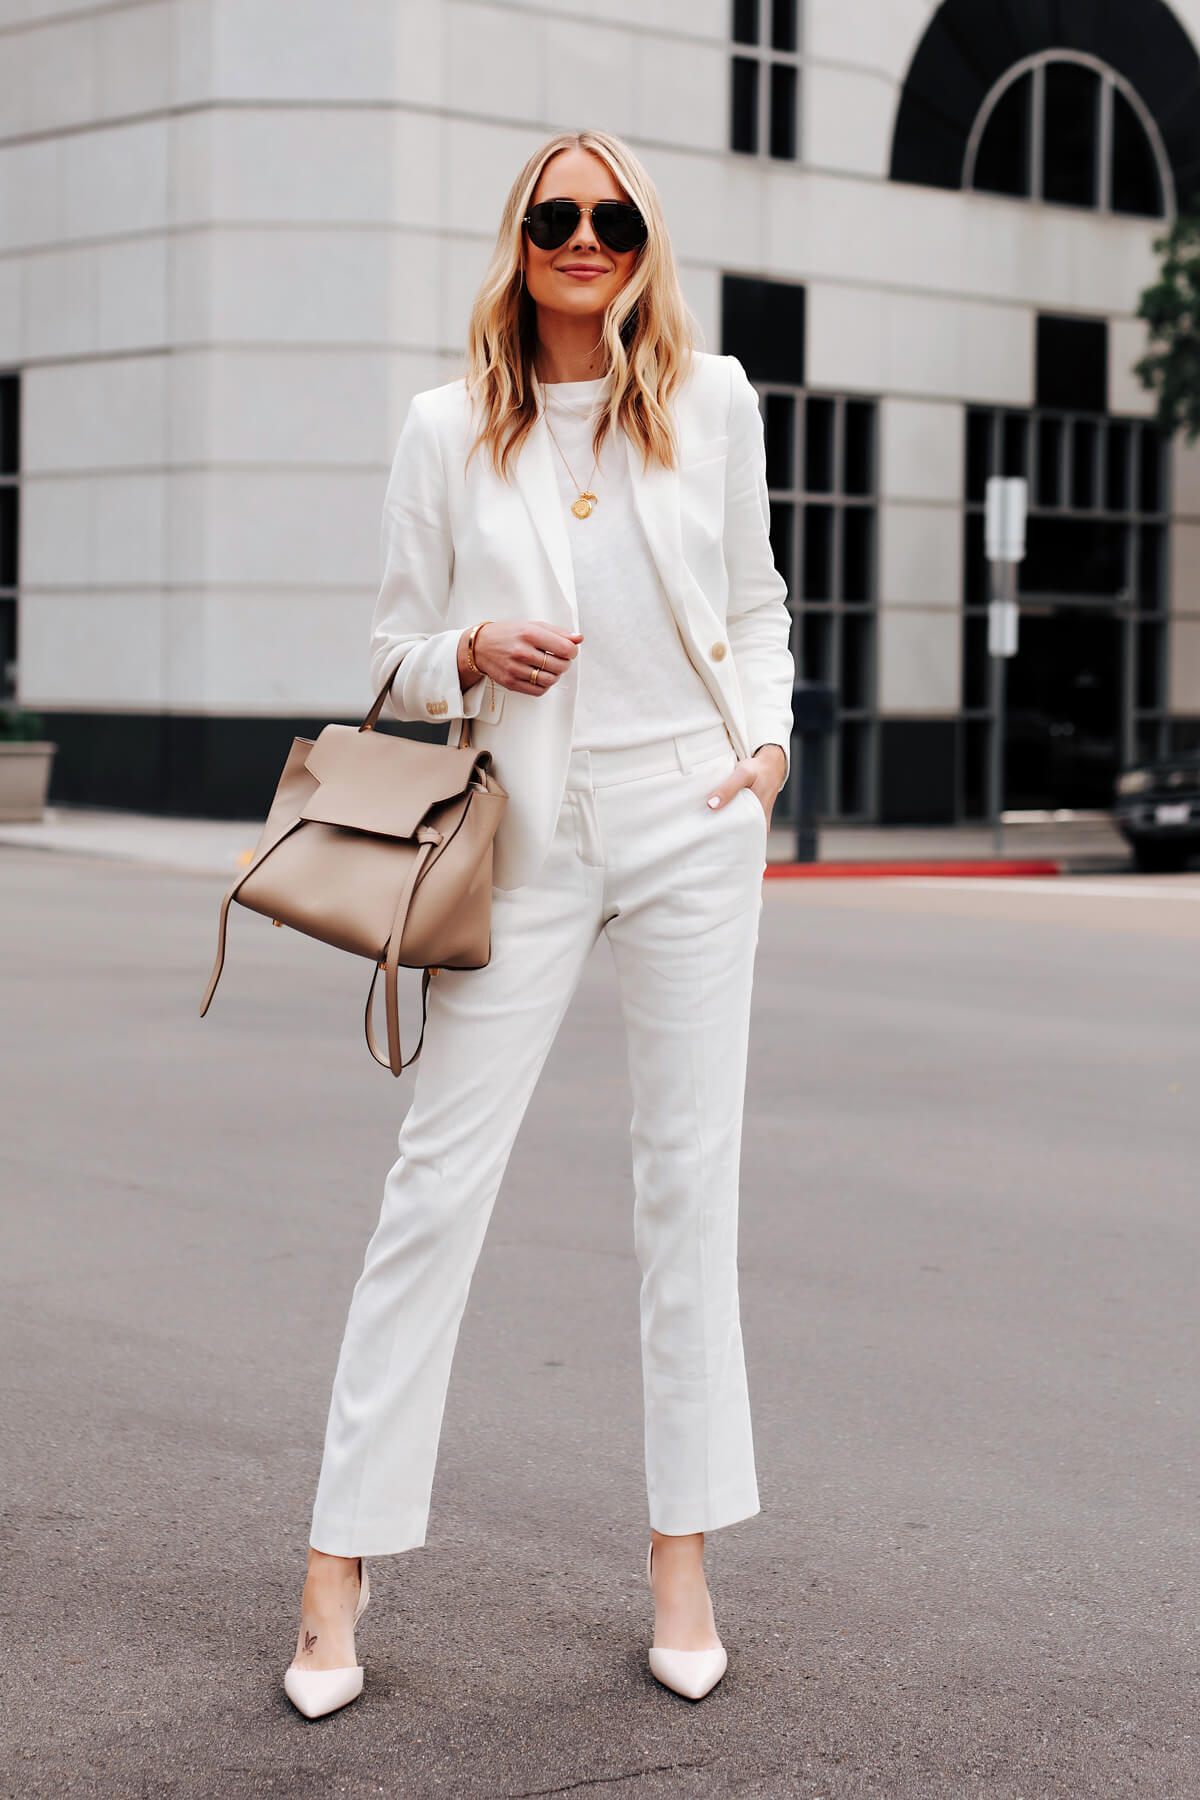 2 Fresh Ways to Style White Pants for Winter | Natalie Yerger